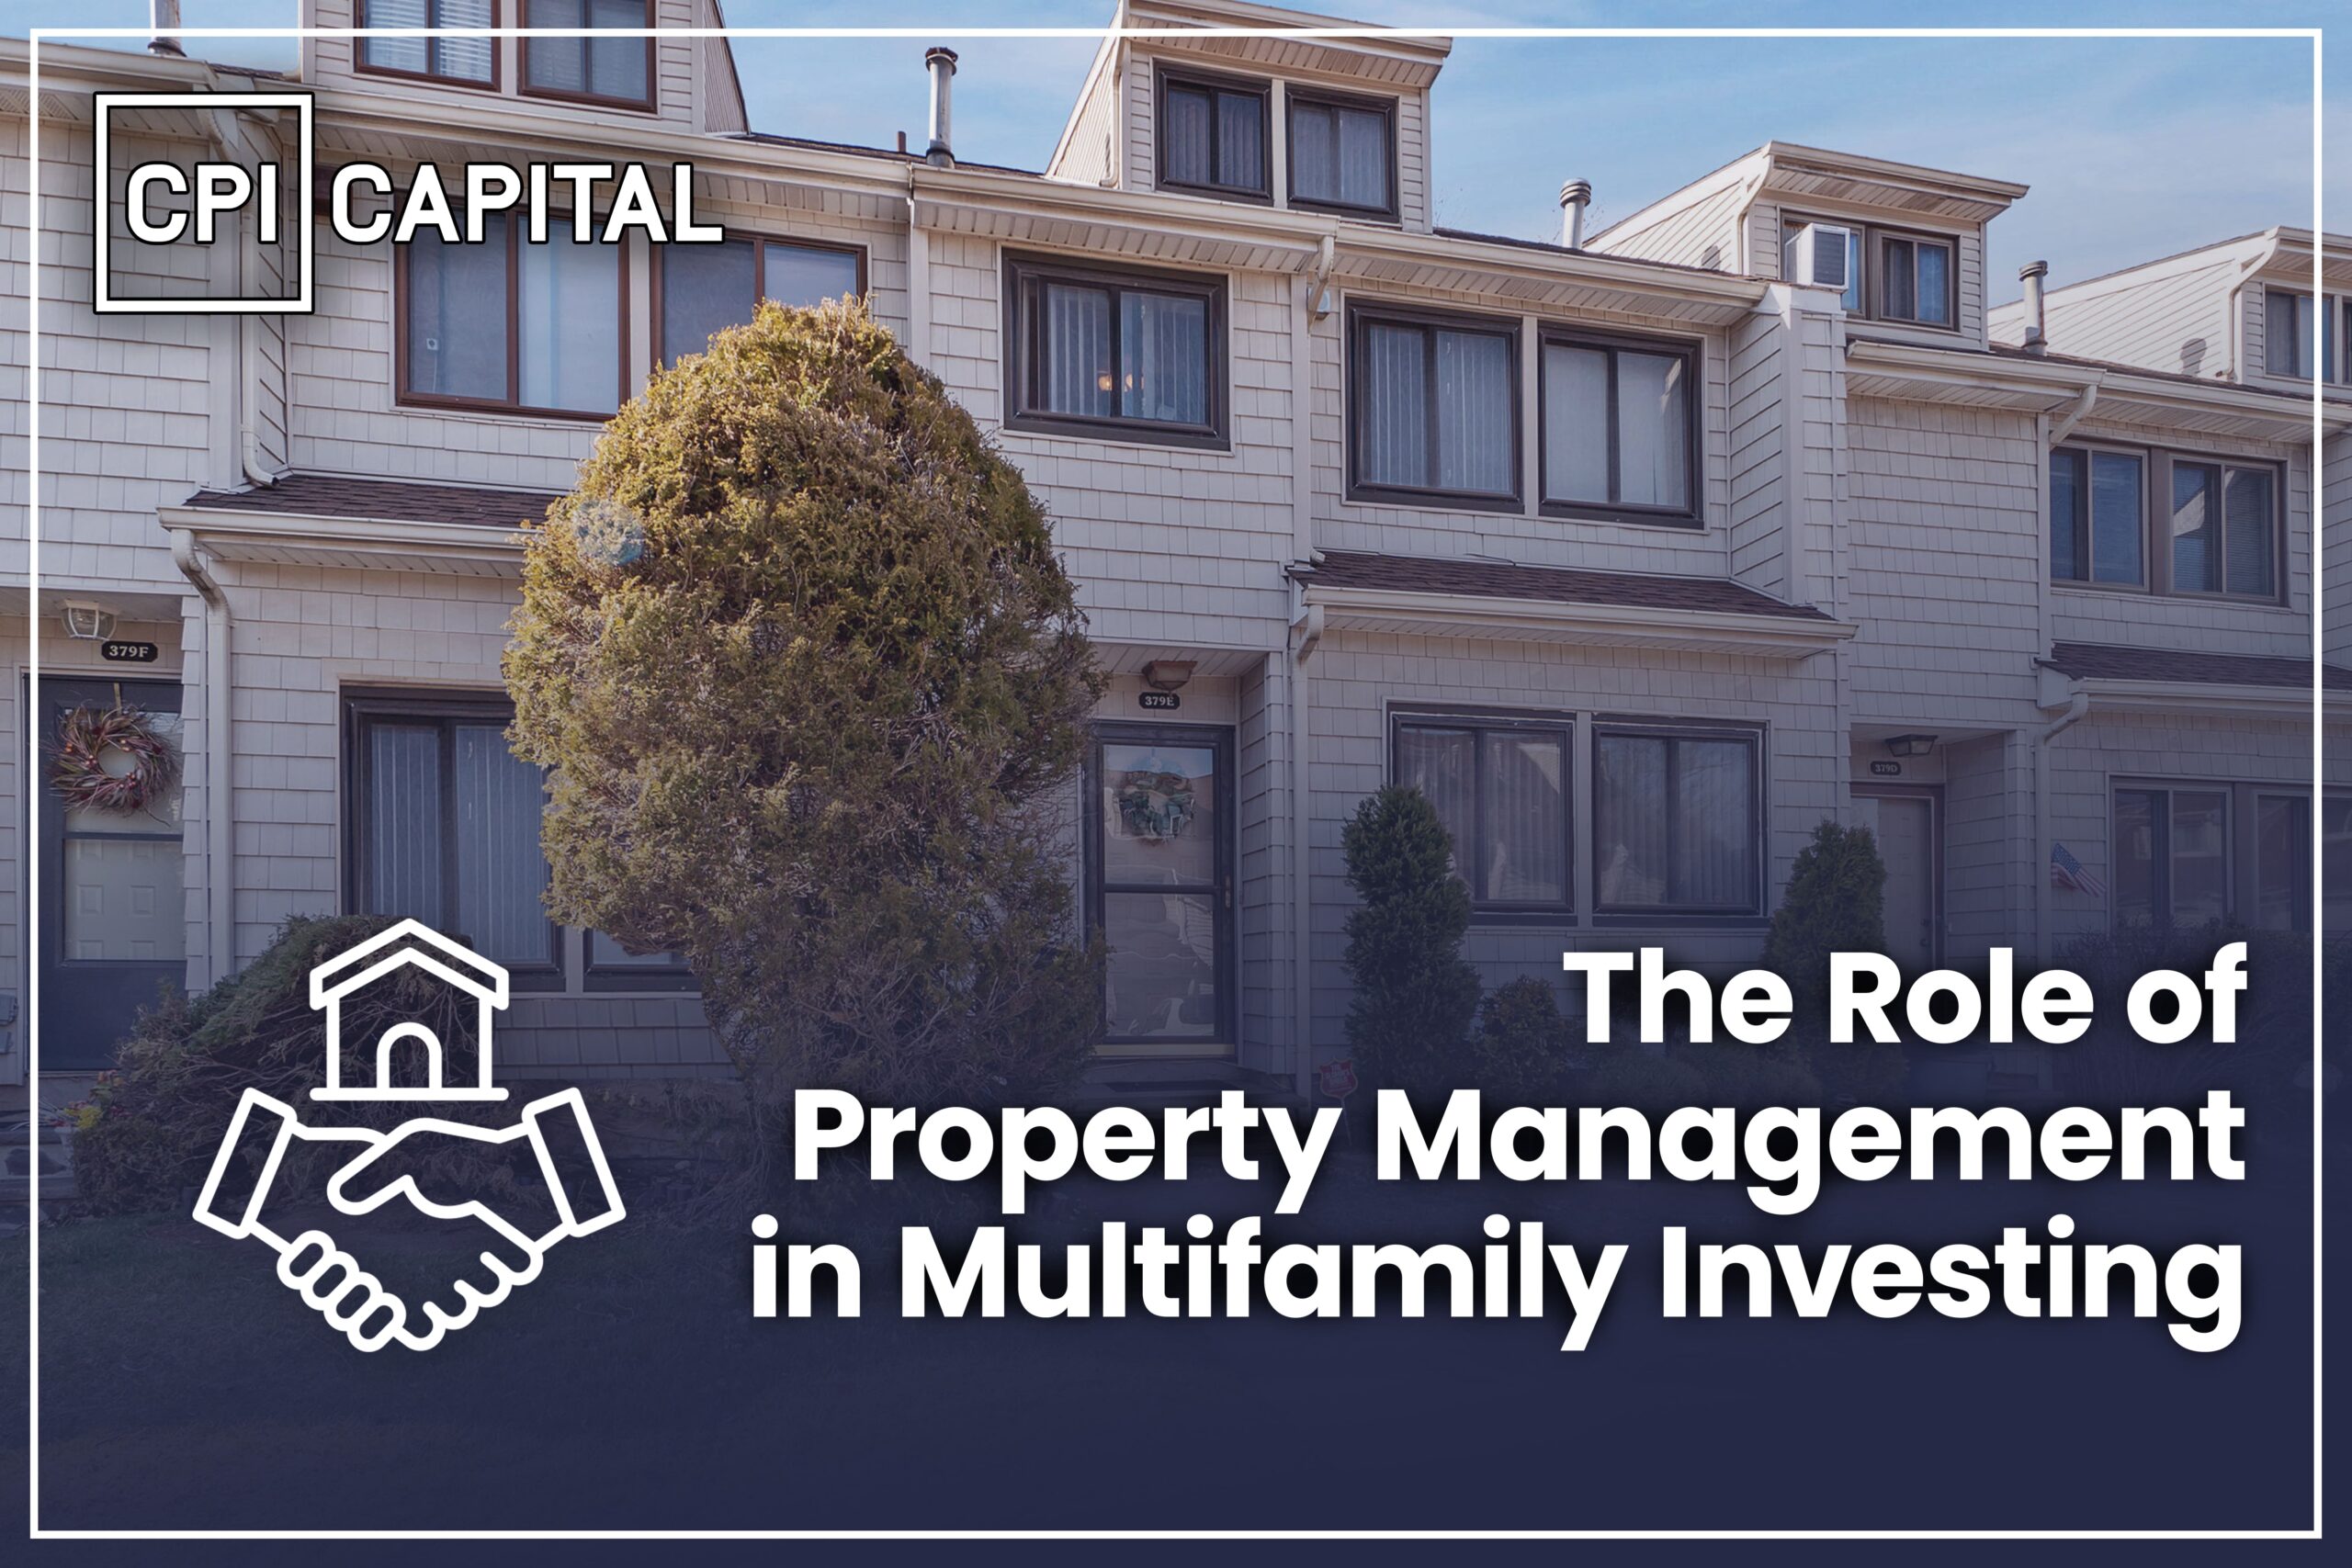 The Role of Property Management in Multifamily Investing